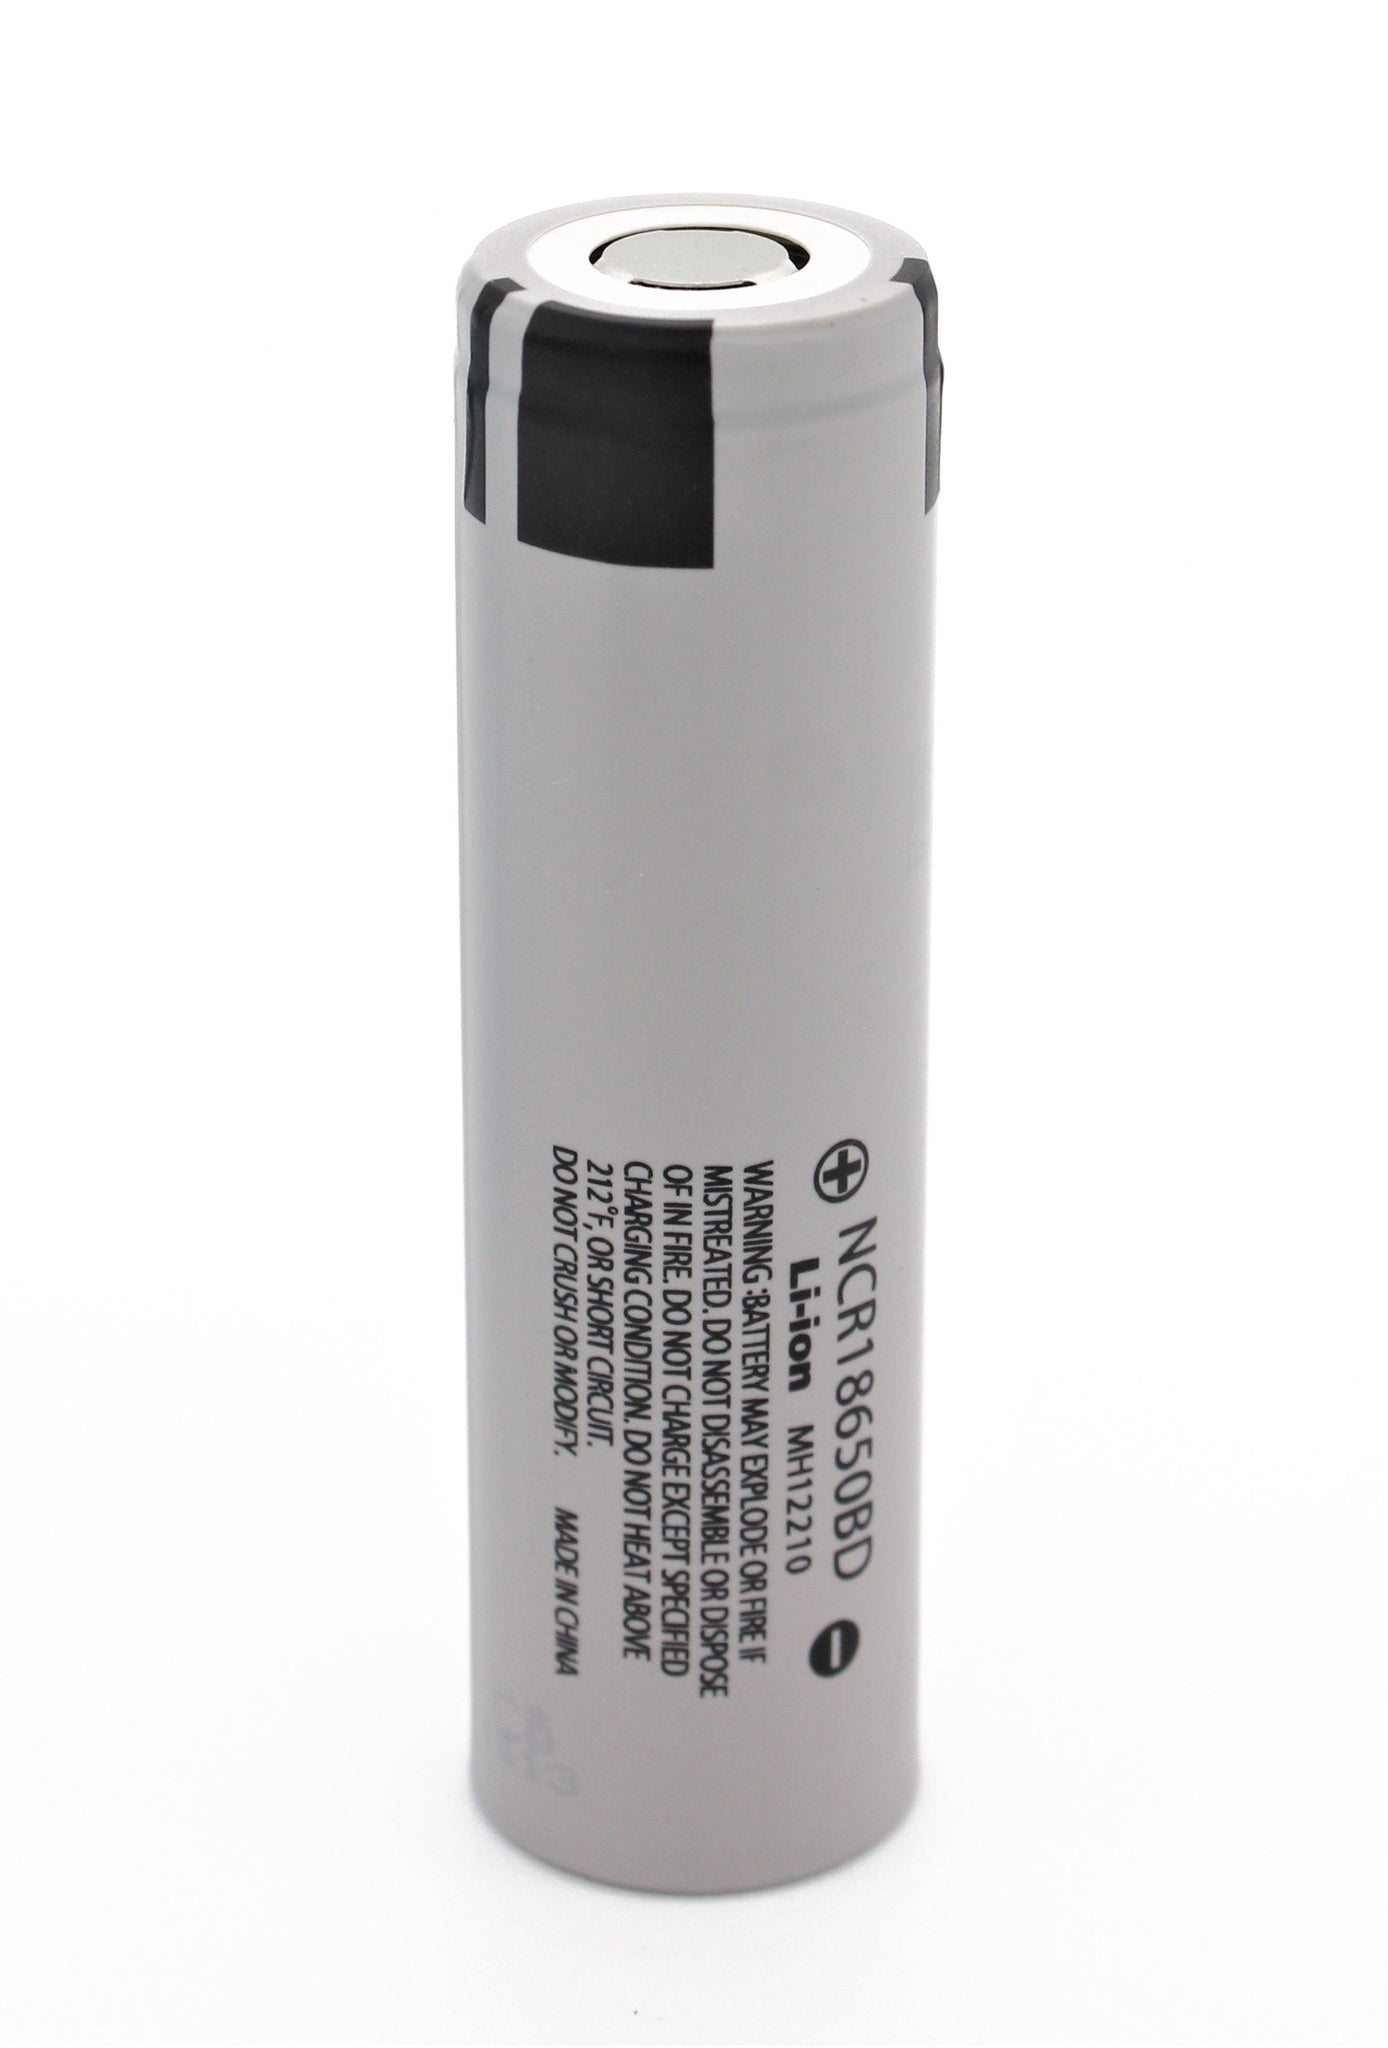 Panasonic NCR18650 BD 3200mAh 10A Rechargeable Lithium-ion Flat Top Battery